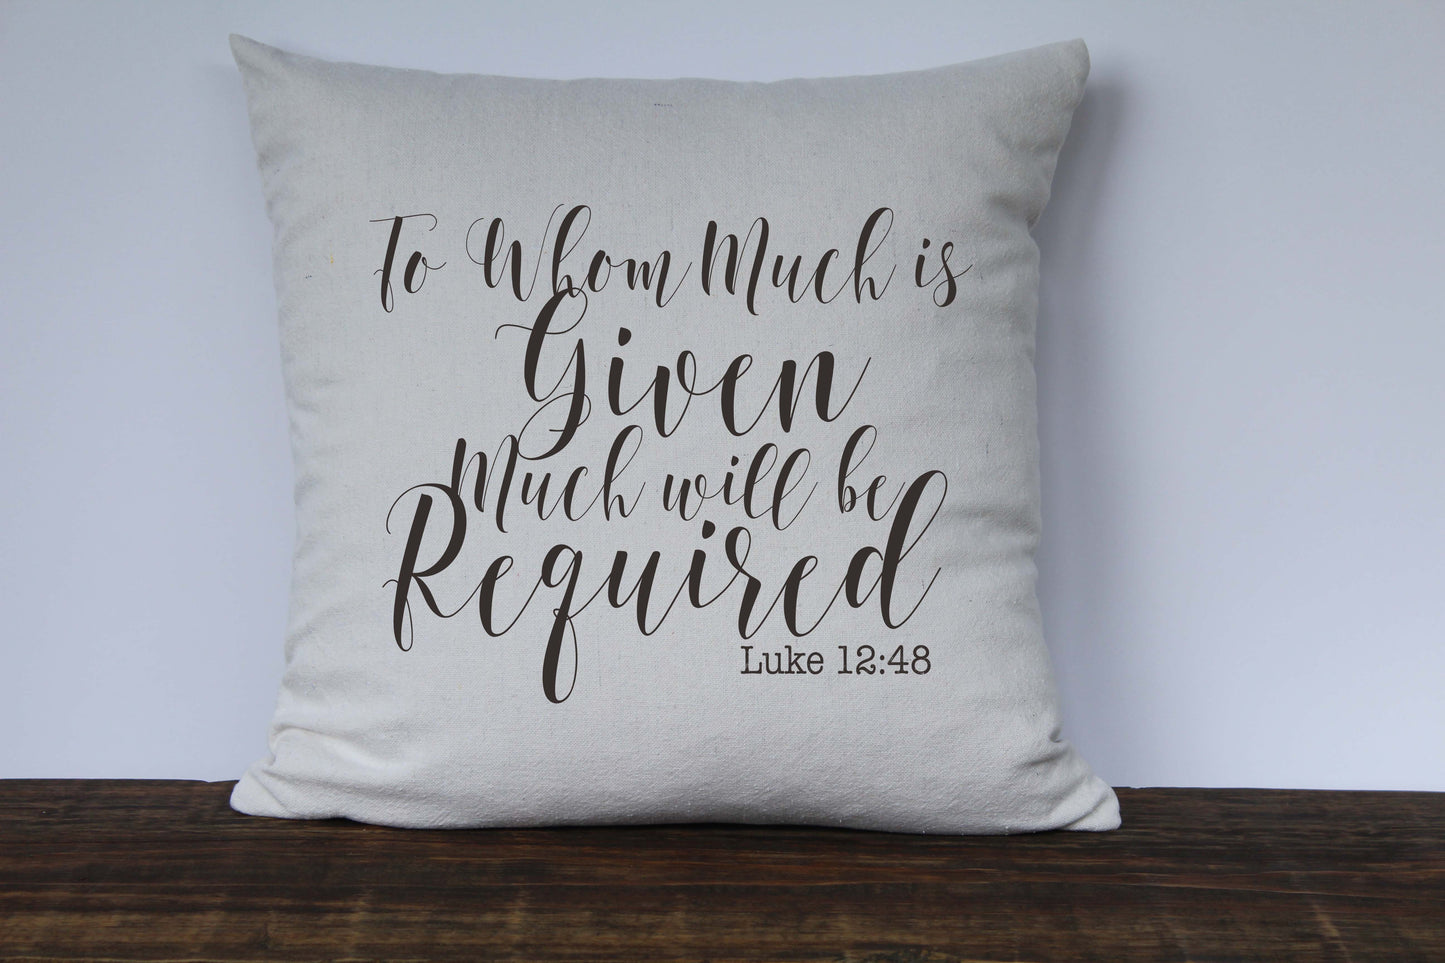 To Whom Much is Given Much Will Be Required Scripture Pillow Cover Luke 12:48 - Returning Grace Designs